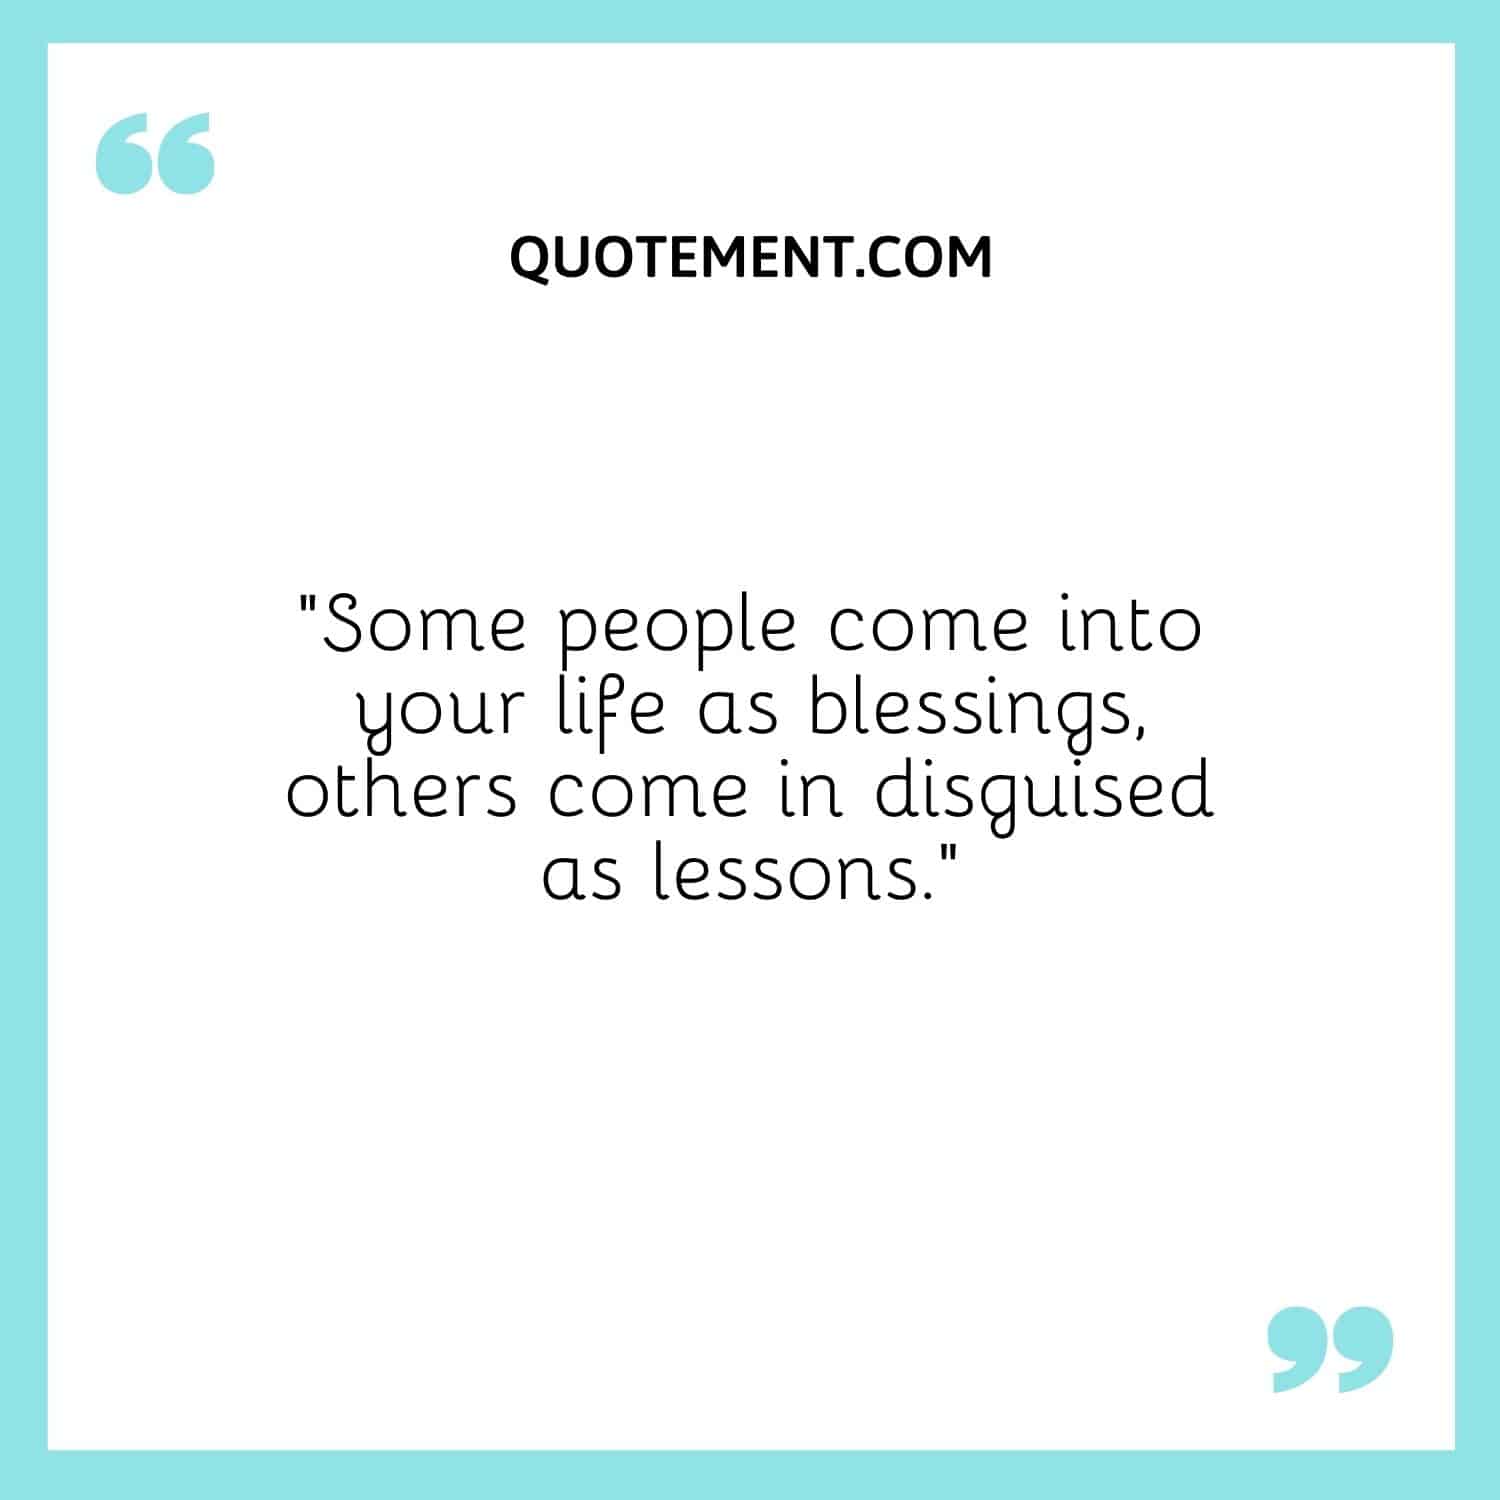 Some people come into your life as blessings, others come in disguised as lessons.